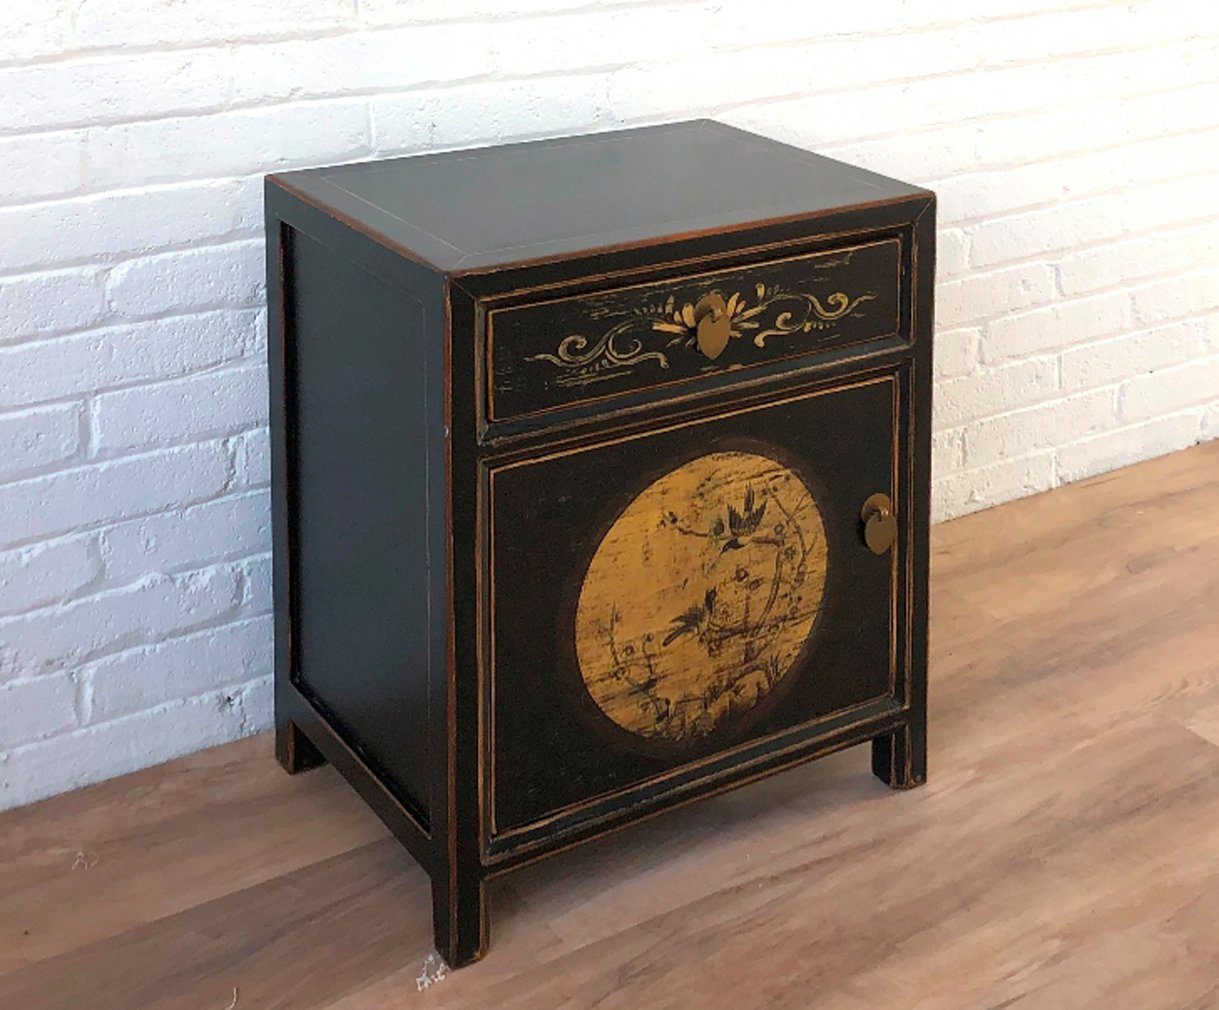 Chinese bedside table "LesNoirs" - Art. 35191-11